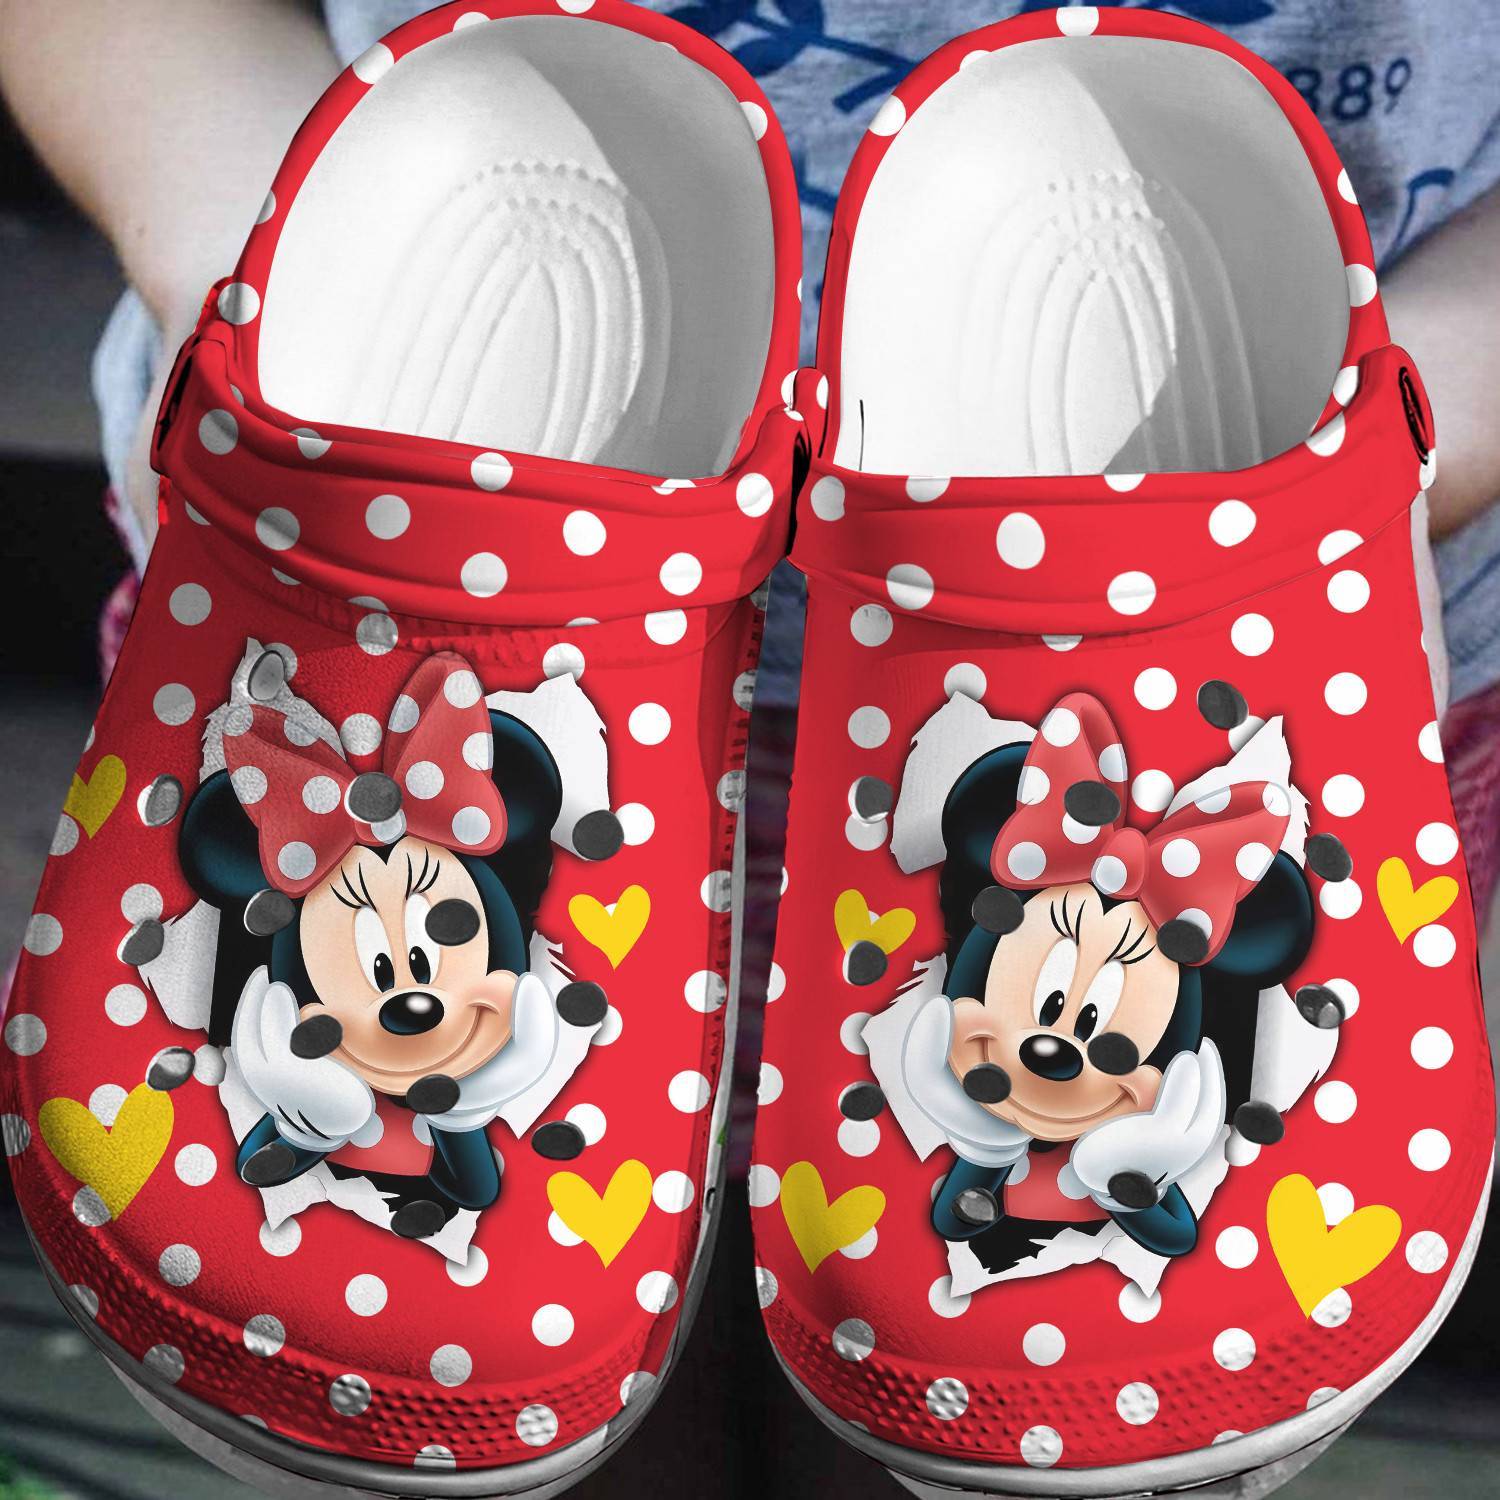 Classic Charm: Minnie Mouse 3D Clog Shoes for Disney Enthusiasts